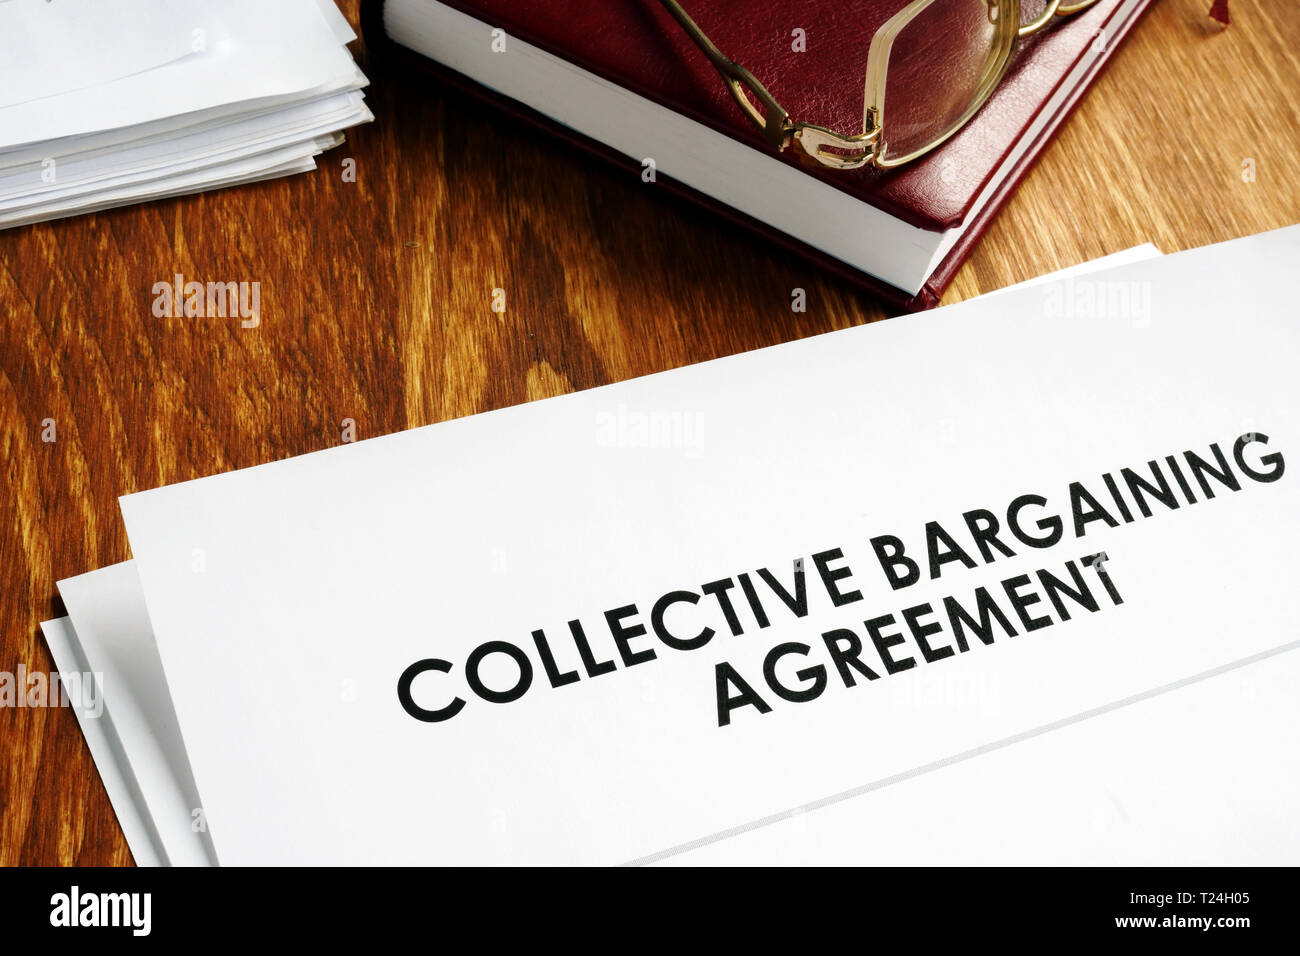 Collective bargaining agreement and note pad with glasses. Stock Photo